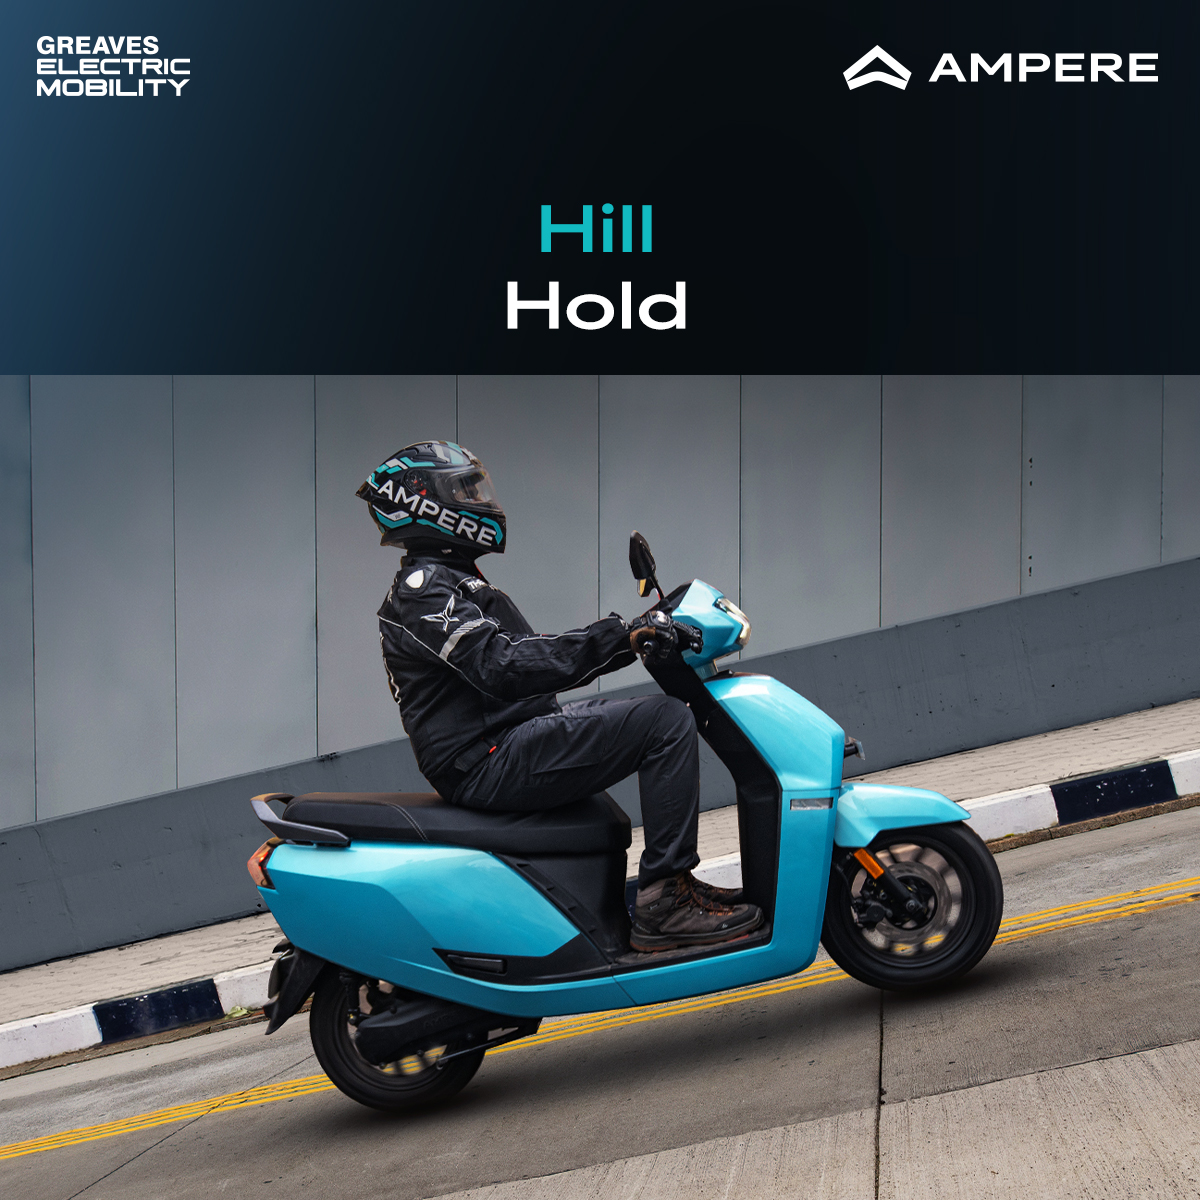 At the intersection of performance and safety stands the #AmpereNexus.⚡

Designed to keep the ones who #TakeCharge safe at every step of the way. For India's first high-performance family electric scooter, we went the extra mile to protect what matters most.